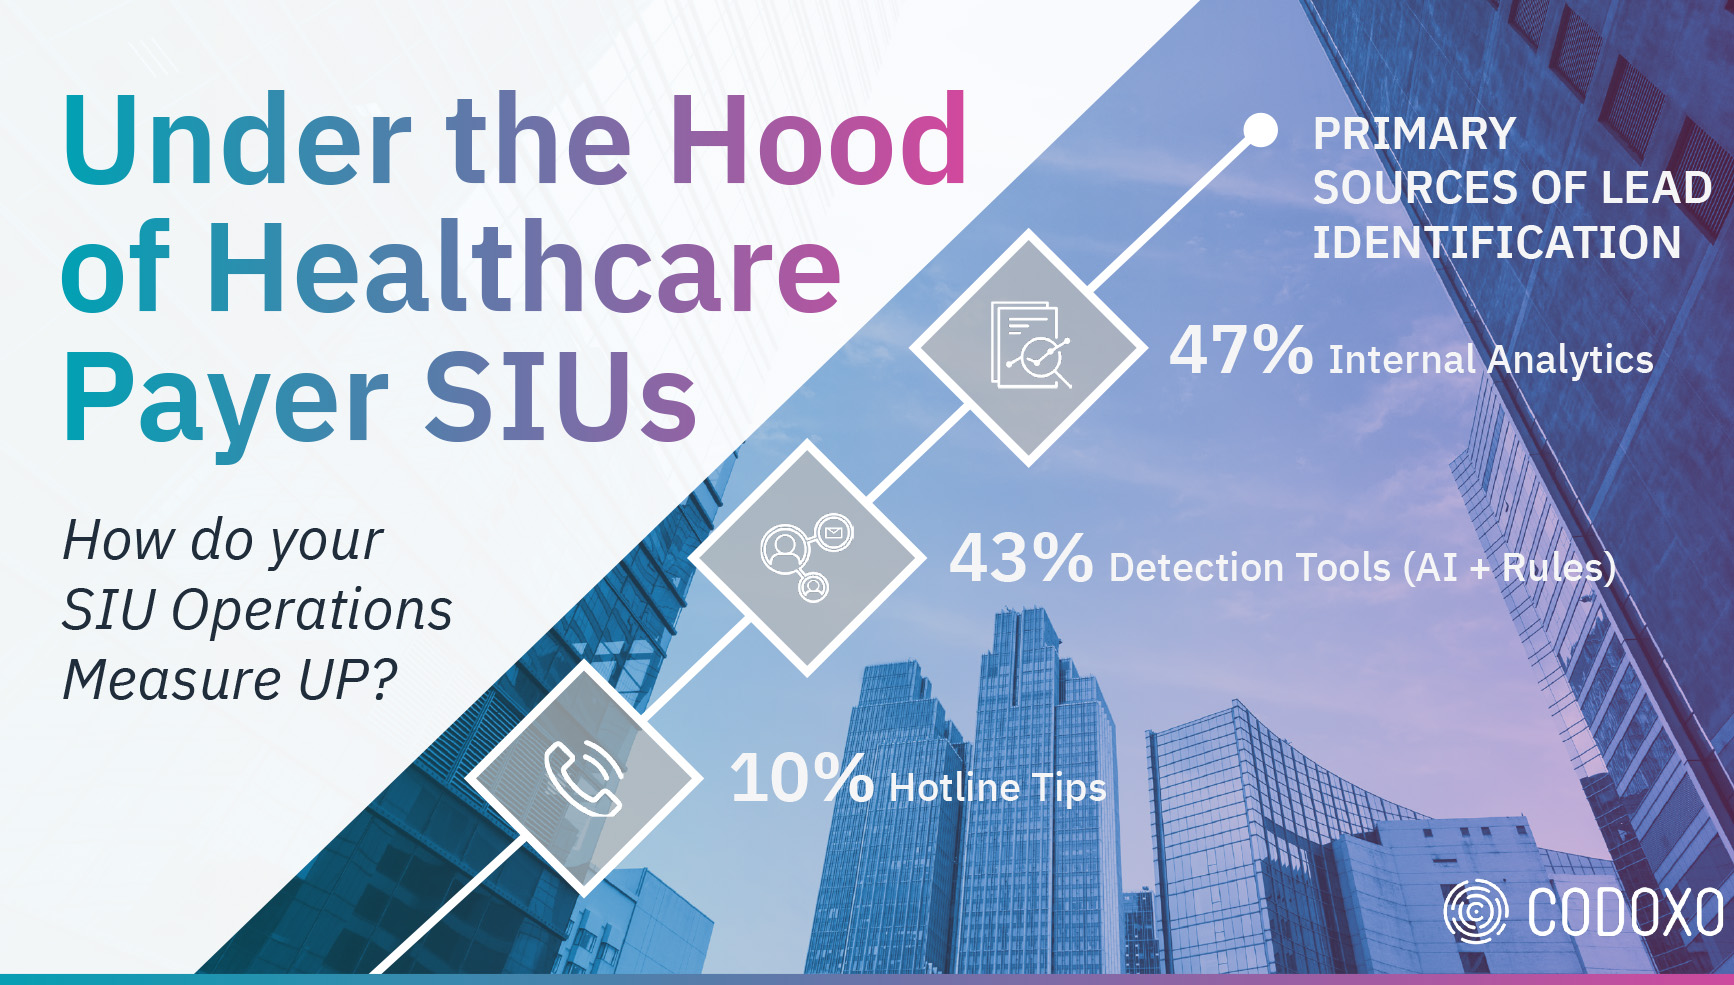 Under the Hood of Healthcare Payer SIU 